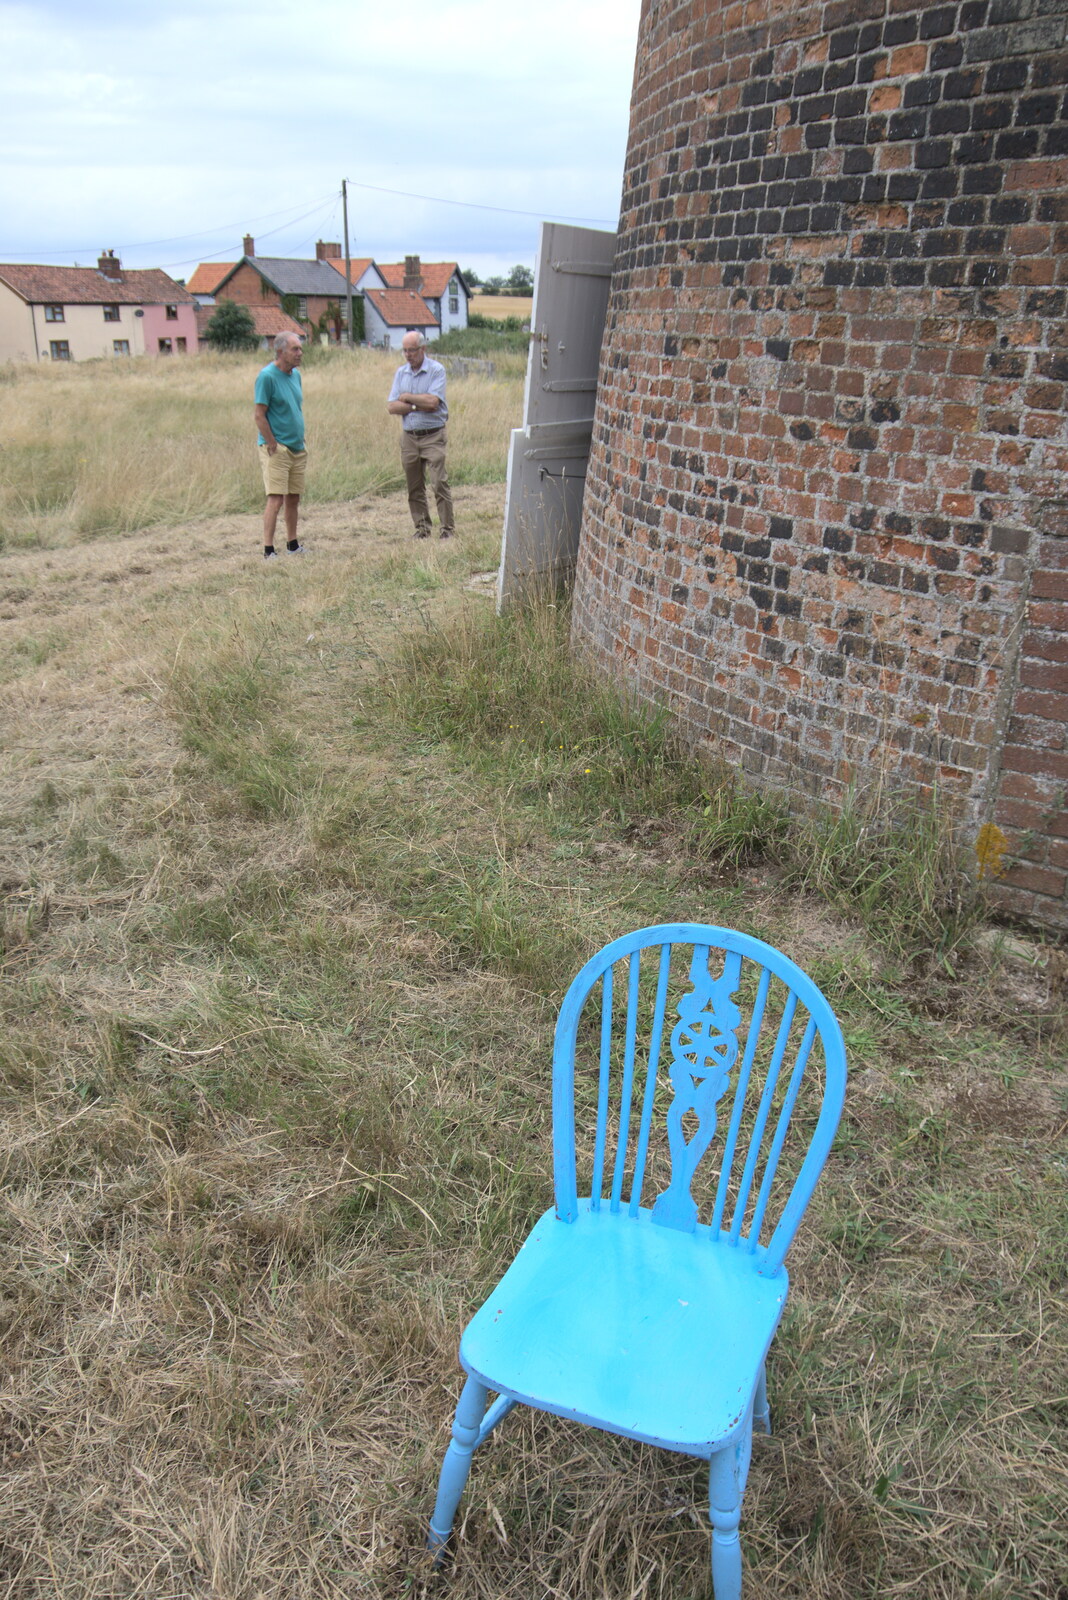 A blue chair in the grass from An Open Day at the Windmill, Billingford, Norfolk - 21st August 2021